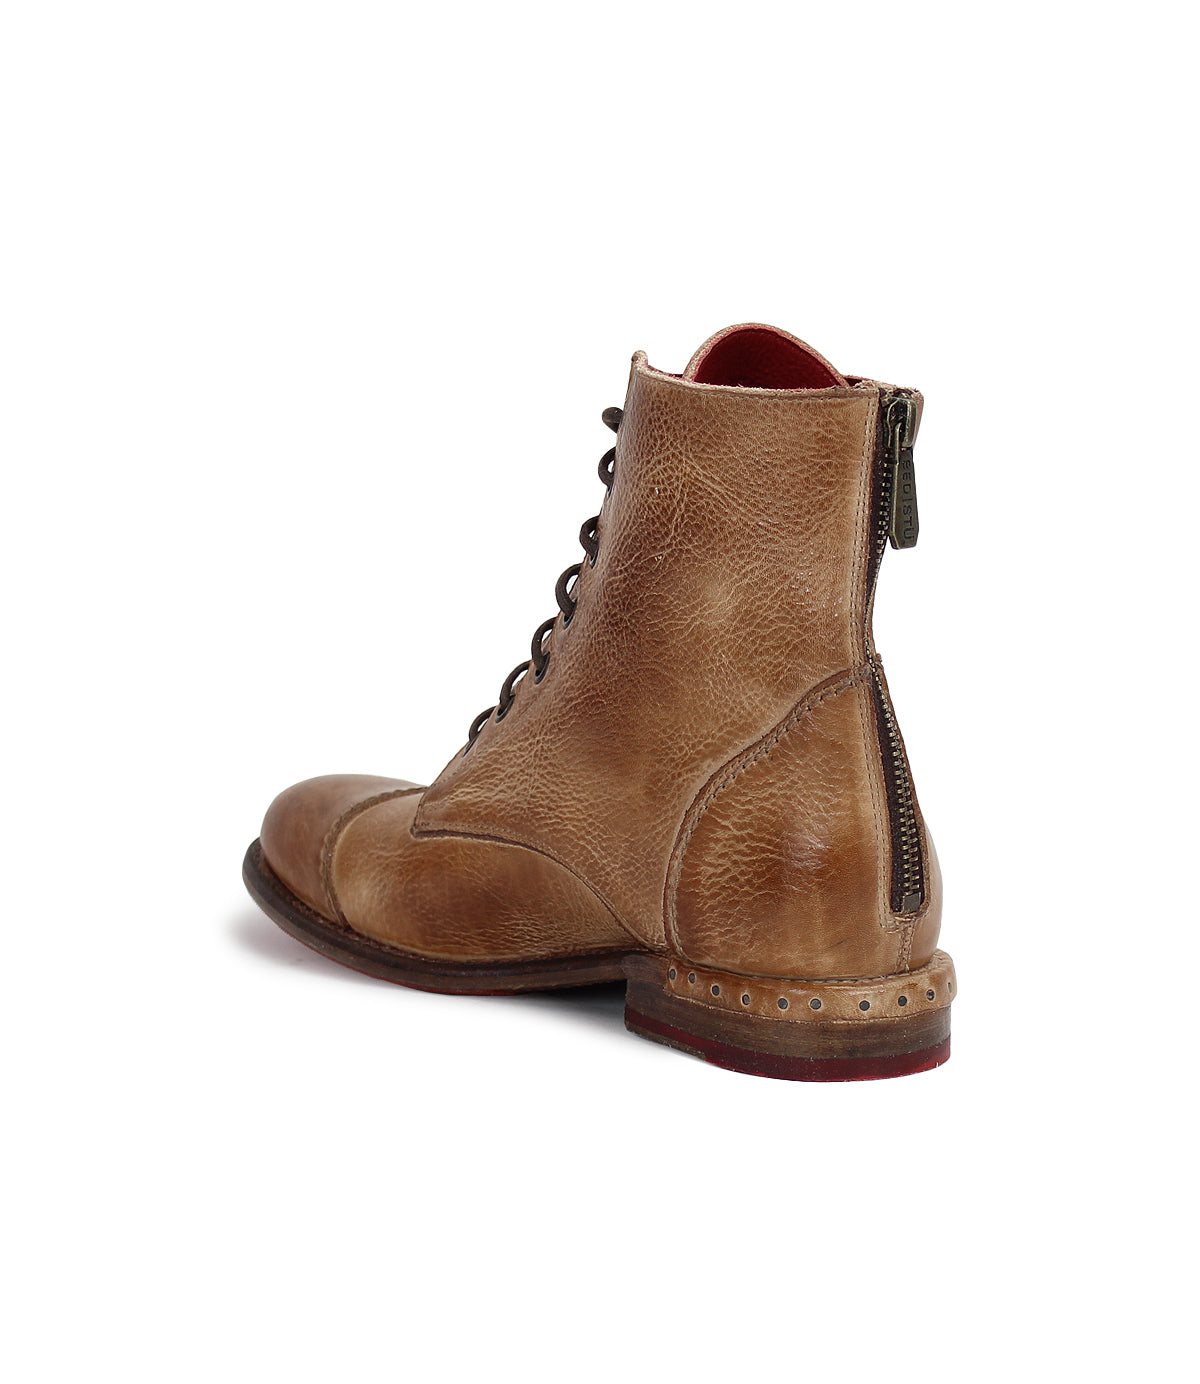 A men's Laurel brown leather boot with a red sole from Bed Stu.